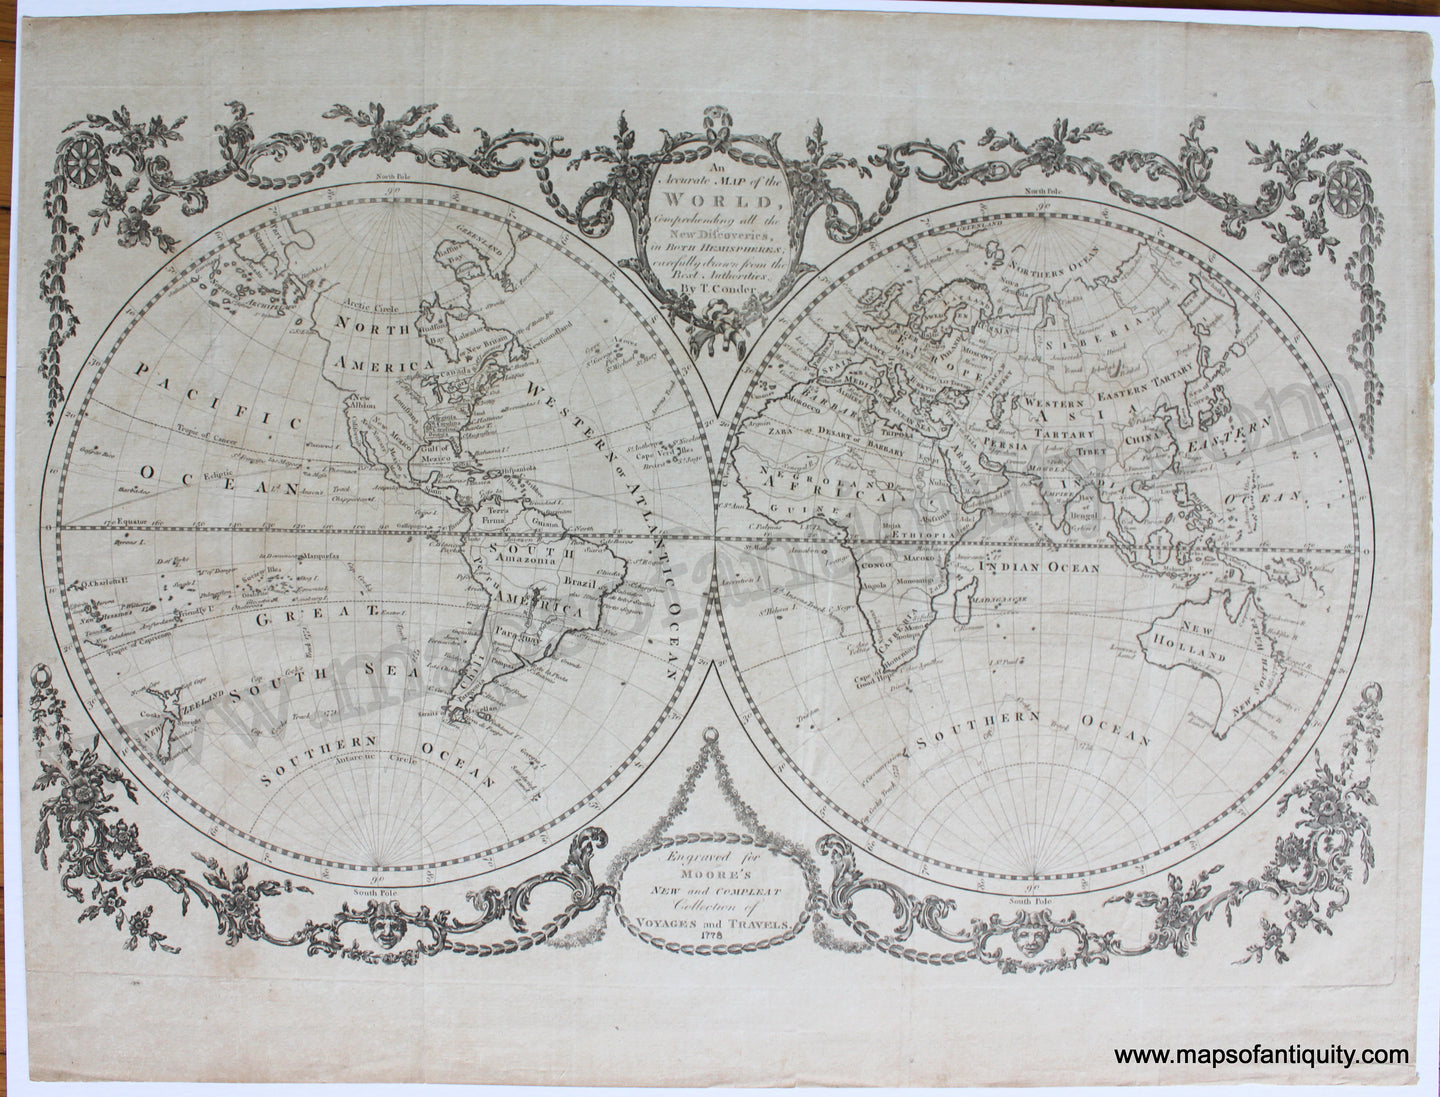 Antique-Uncolored-Map-An-Accurate-Map-of-the-World-Comprehending-all-the-New-Discoveries-in-Both-Hemispheres;-carefully-drawn-from-the-Best-Authorities.-1778-T.-Conder-1800s-19th-century-Maps-of-Antiquity